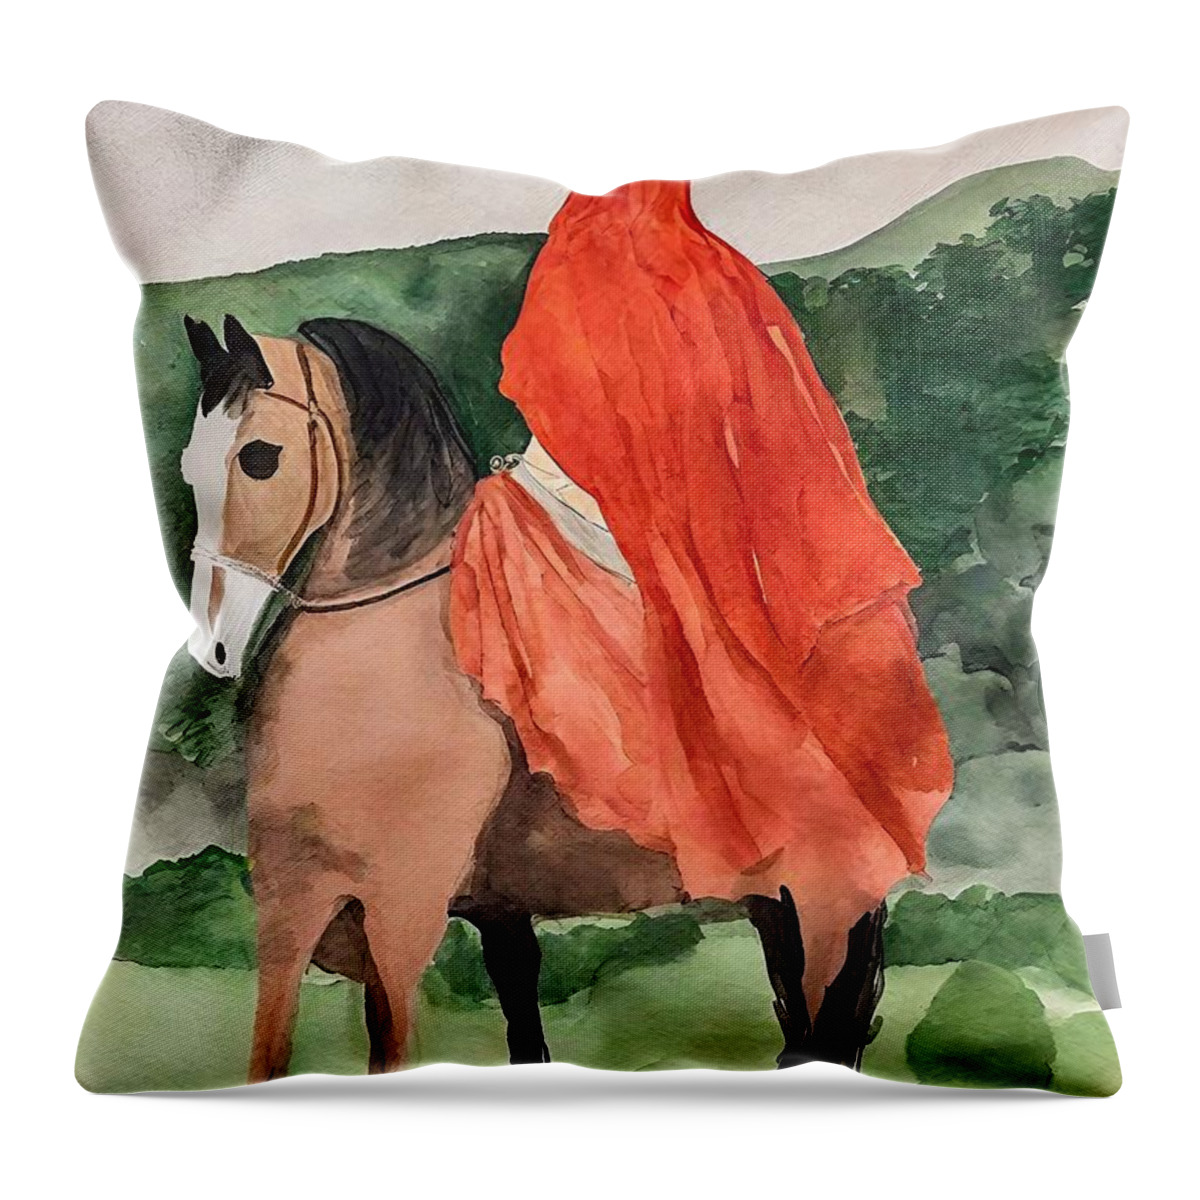 Horse Throw Pillow featuring the painting Painting Donna A Cavallo horse animal art illustr by N Akkash